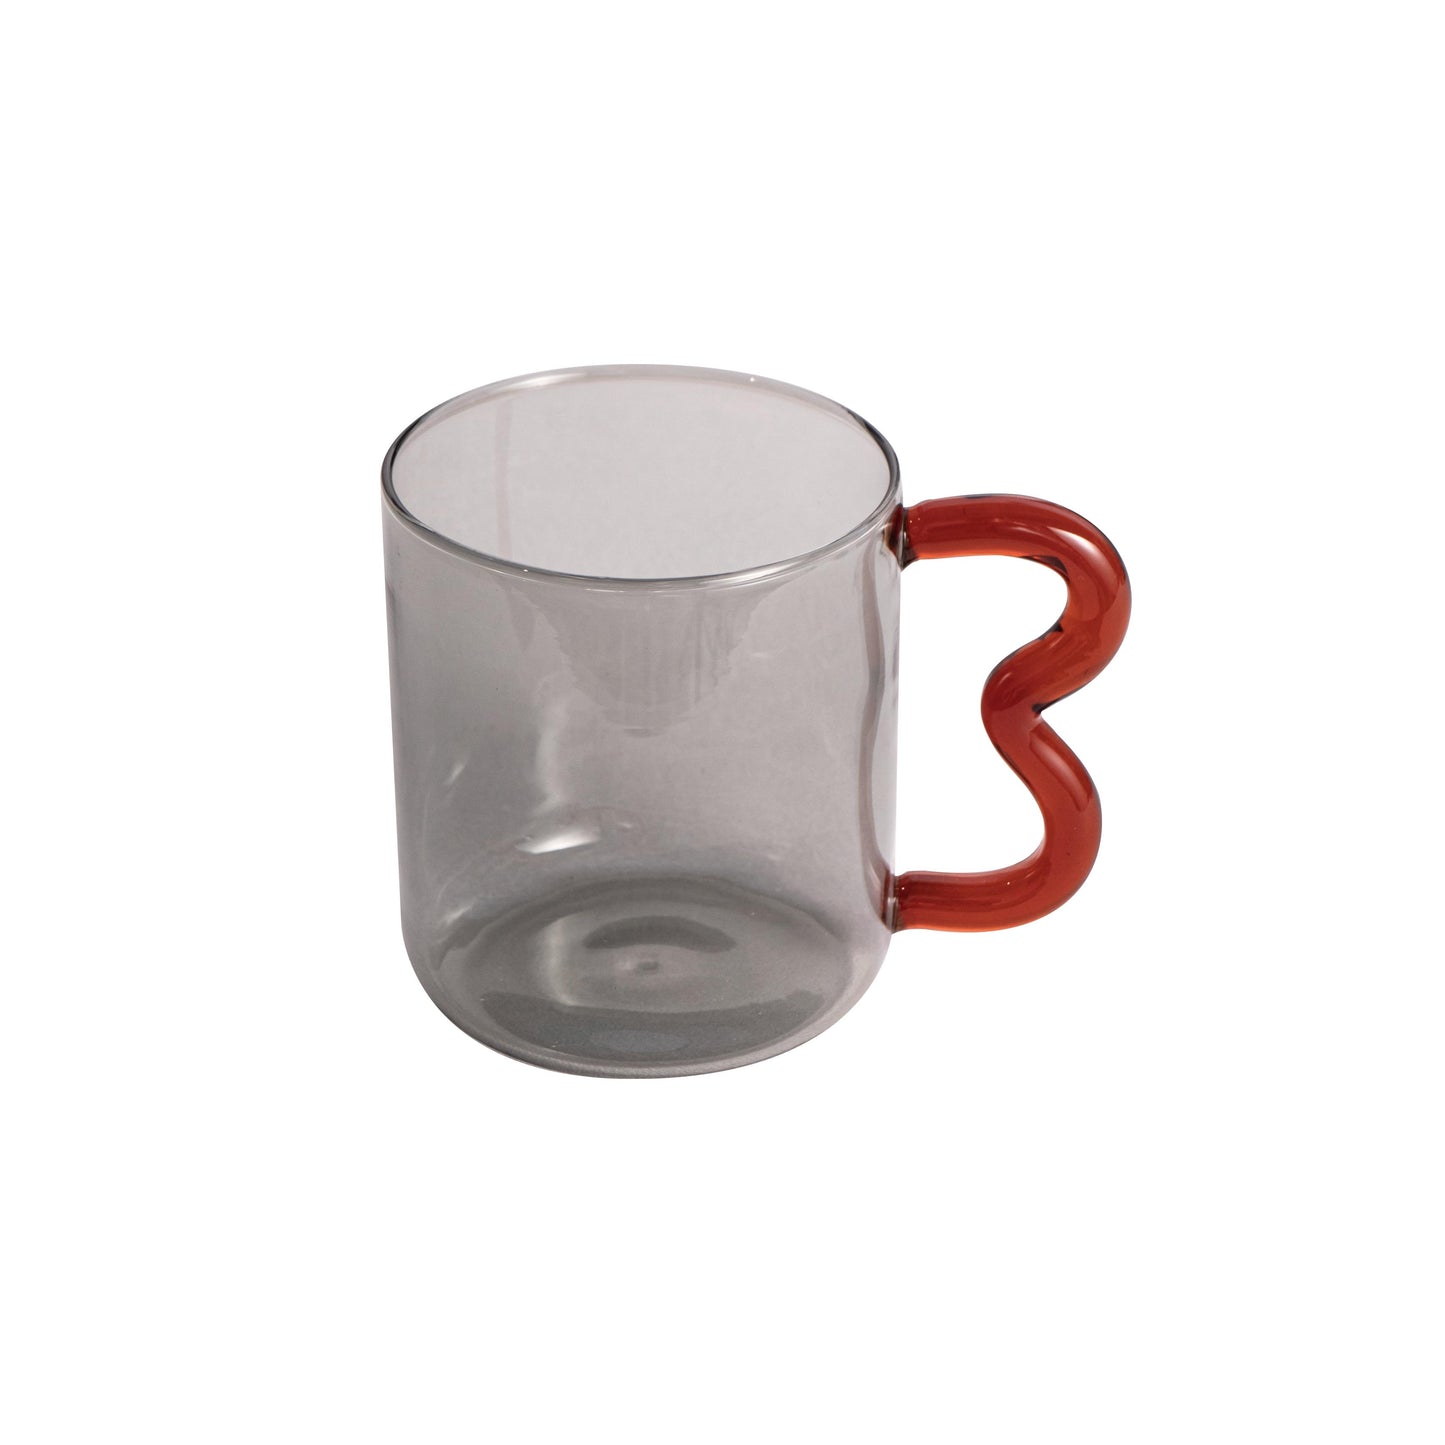 Betim Colored Glass Cup